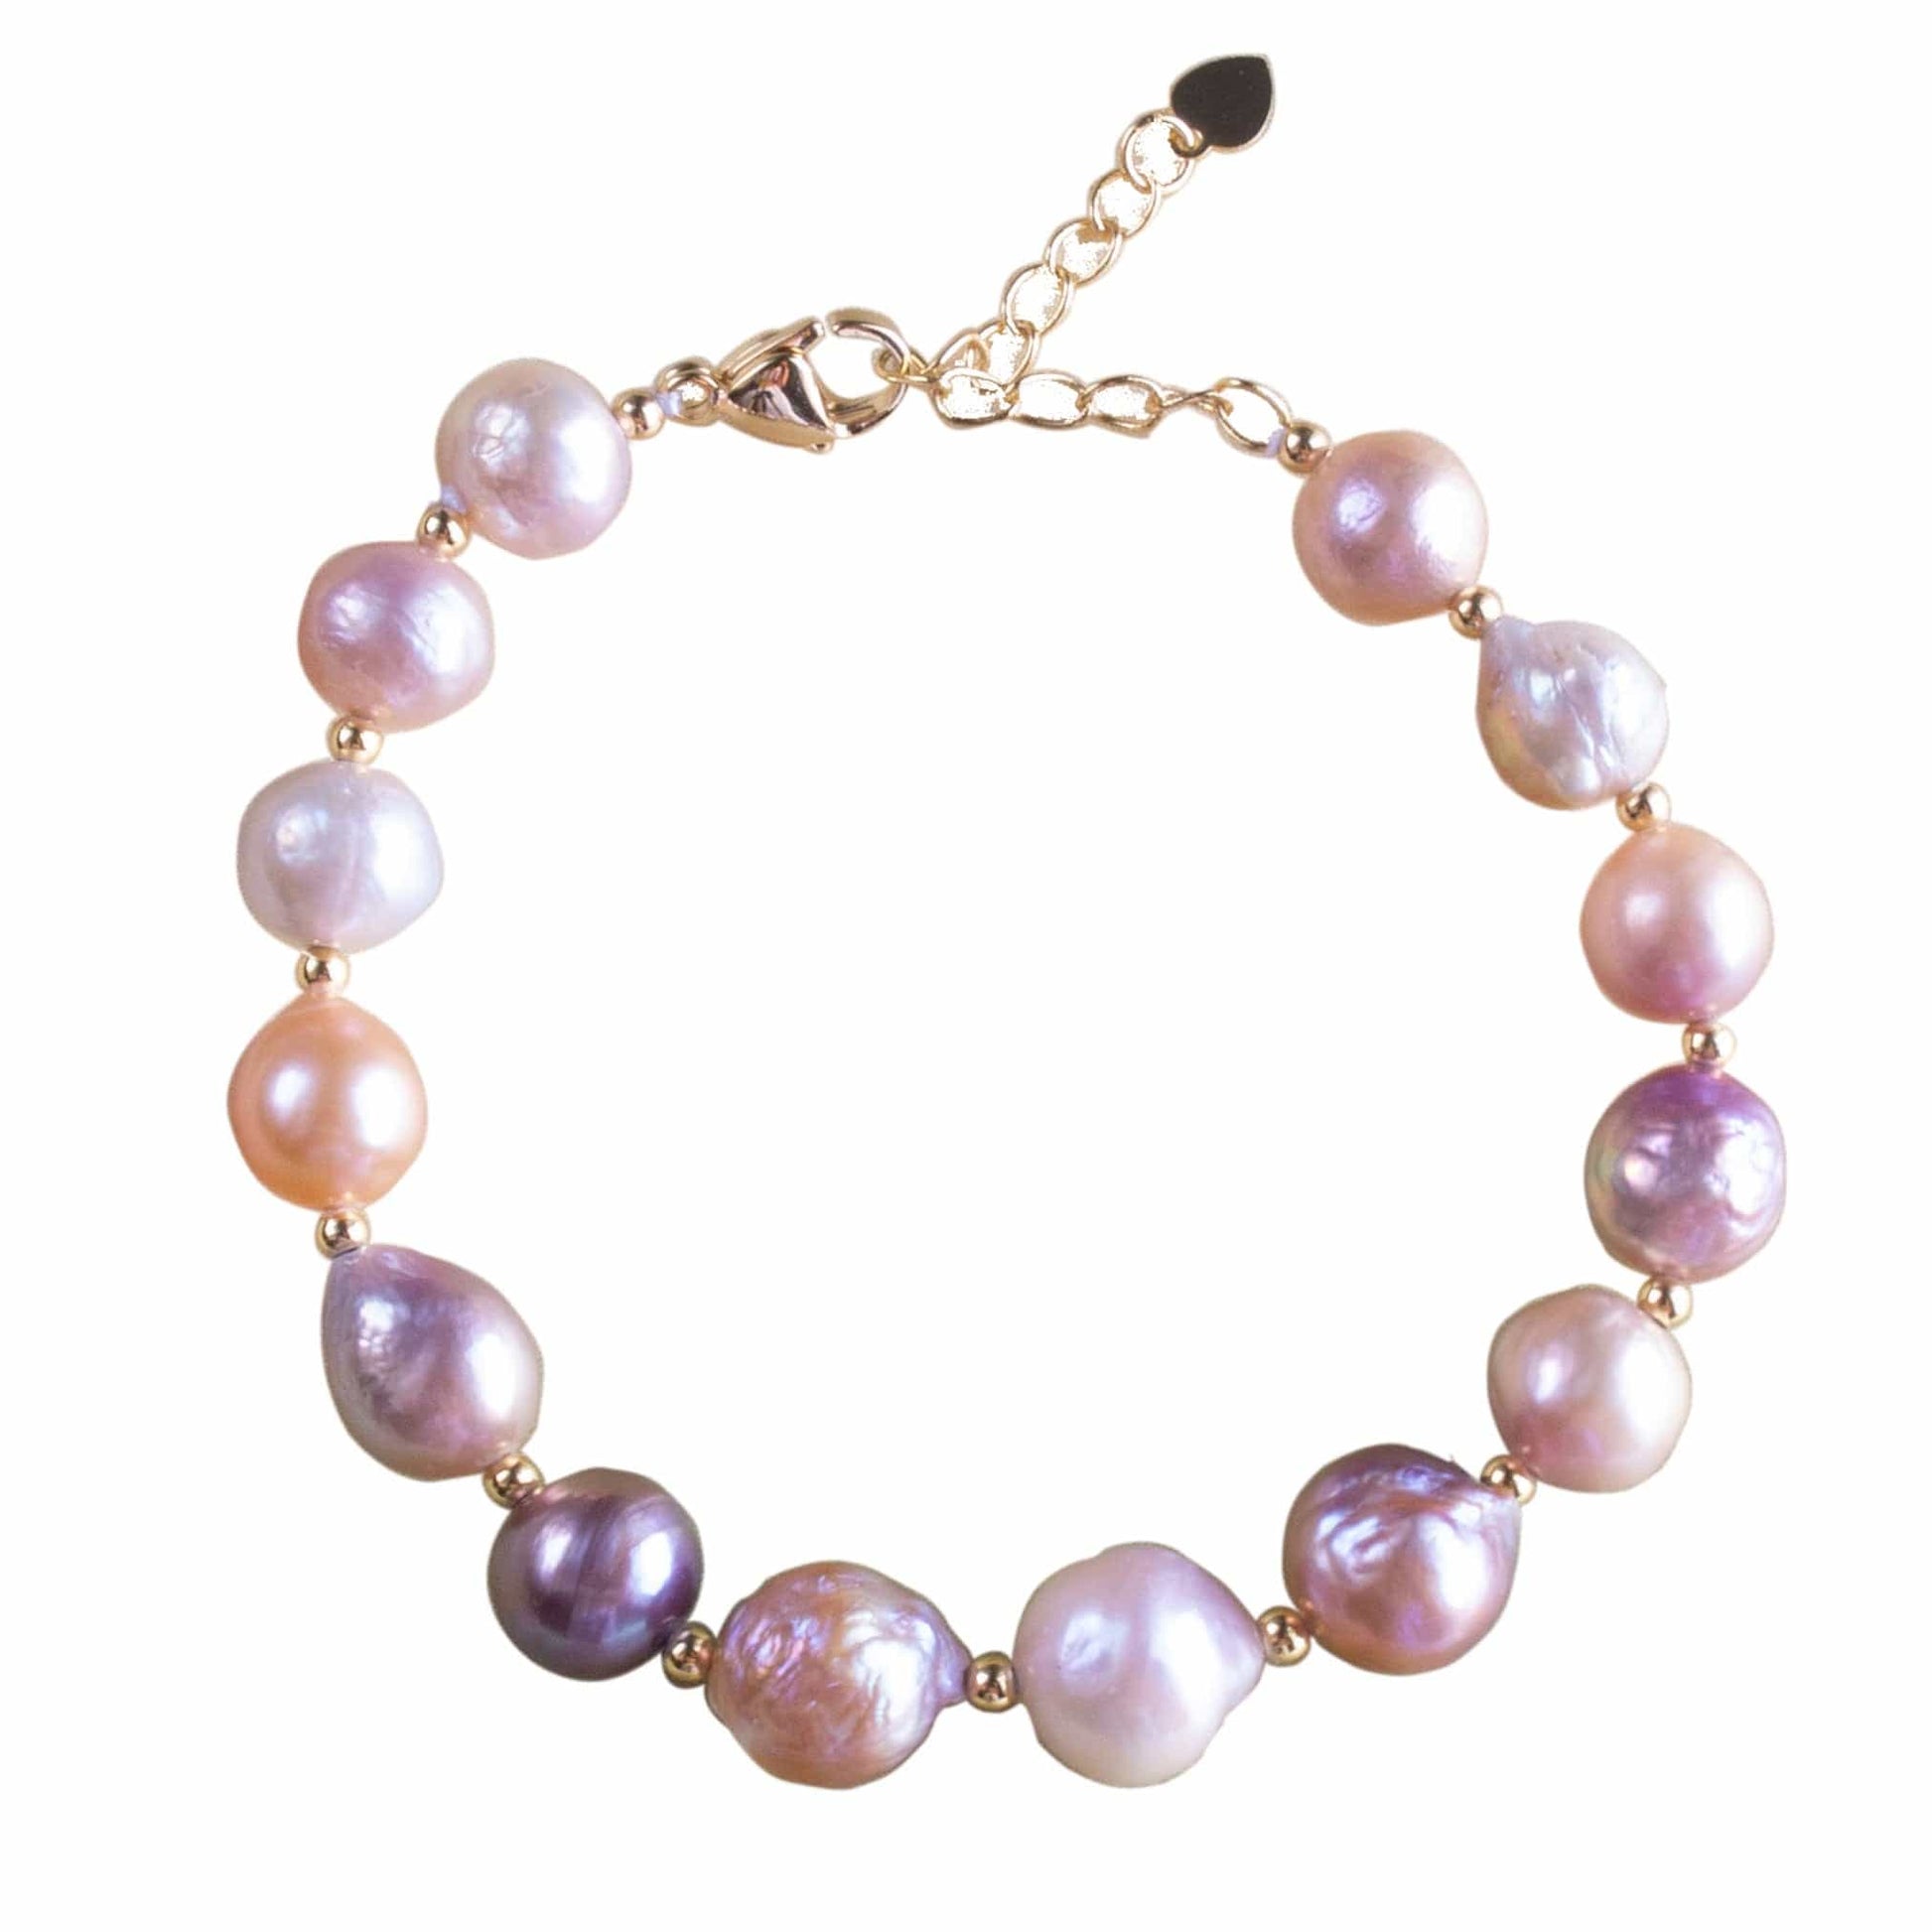 Arbor Trading Post Bracelets Handcrafted Multicolor Cultured Freshwater Baroque Pearl Bracelet with Gold Finish Chain and Beads, 10 mm Pearl, 7.5 Inch Long